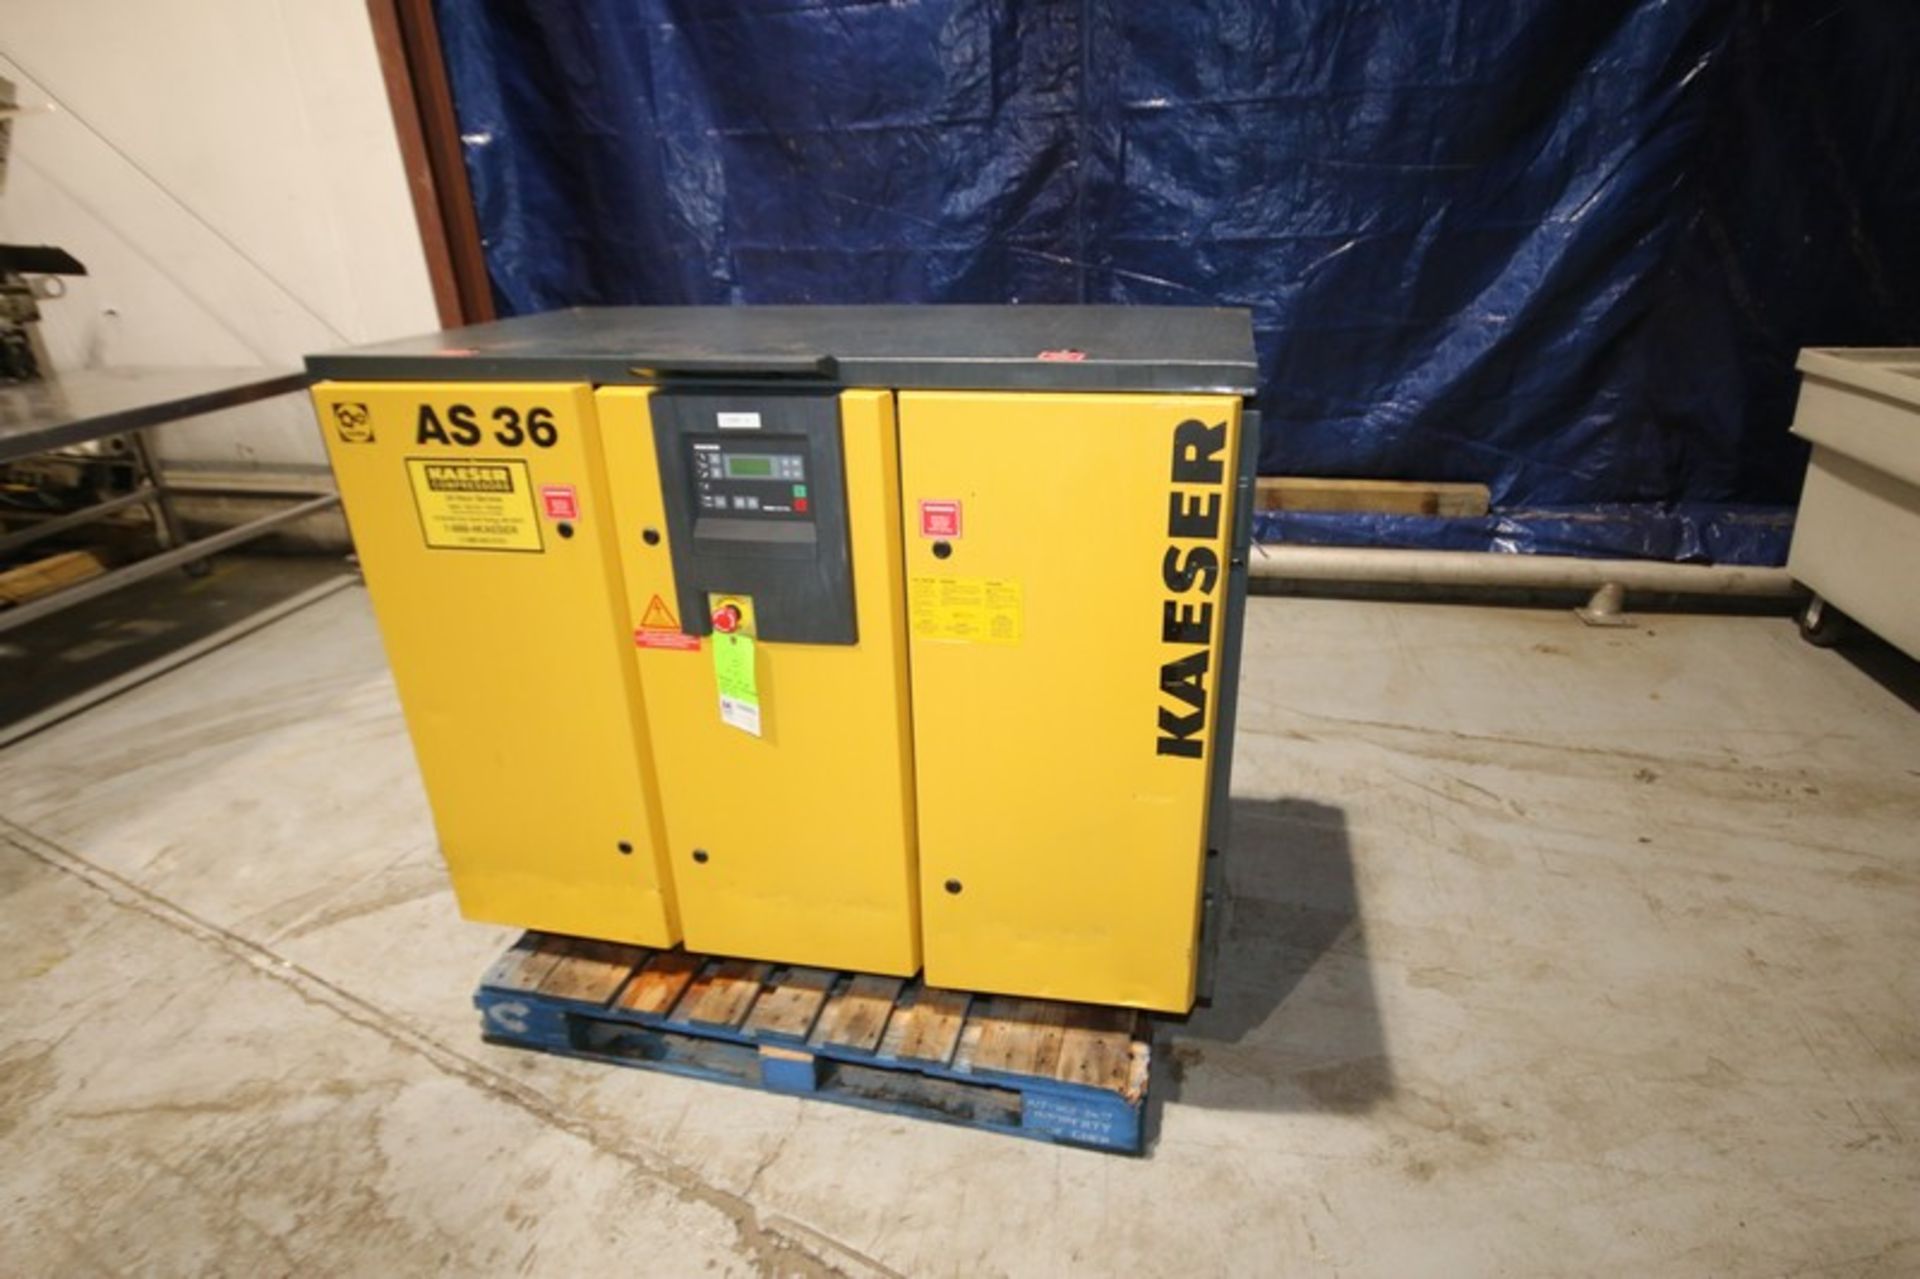 Kaeser 30 hp Screw Air Compressor, Model AS36, with Controls, 230/460V (INV#100093) (Located @ the